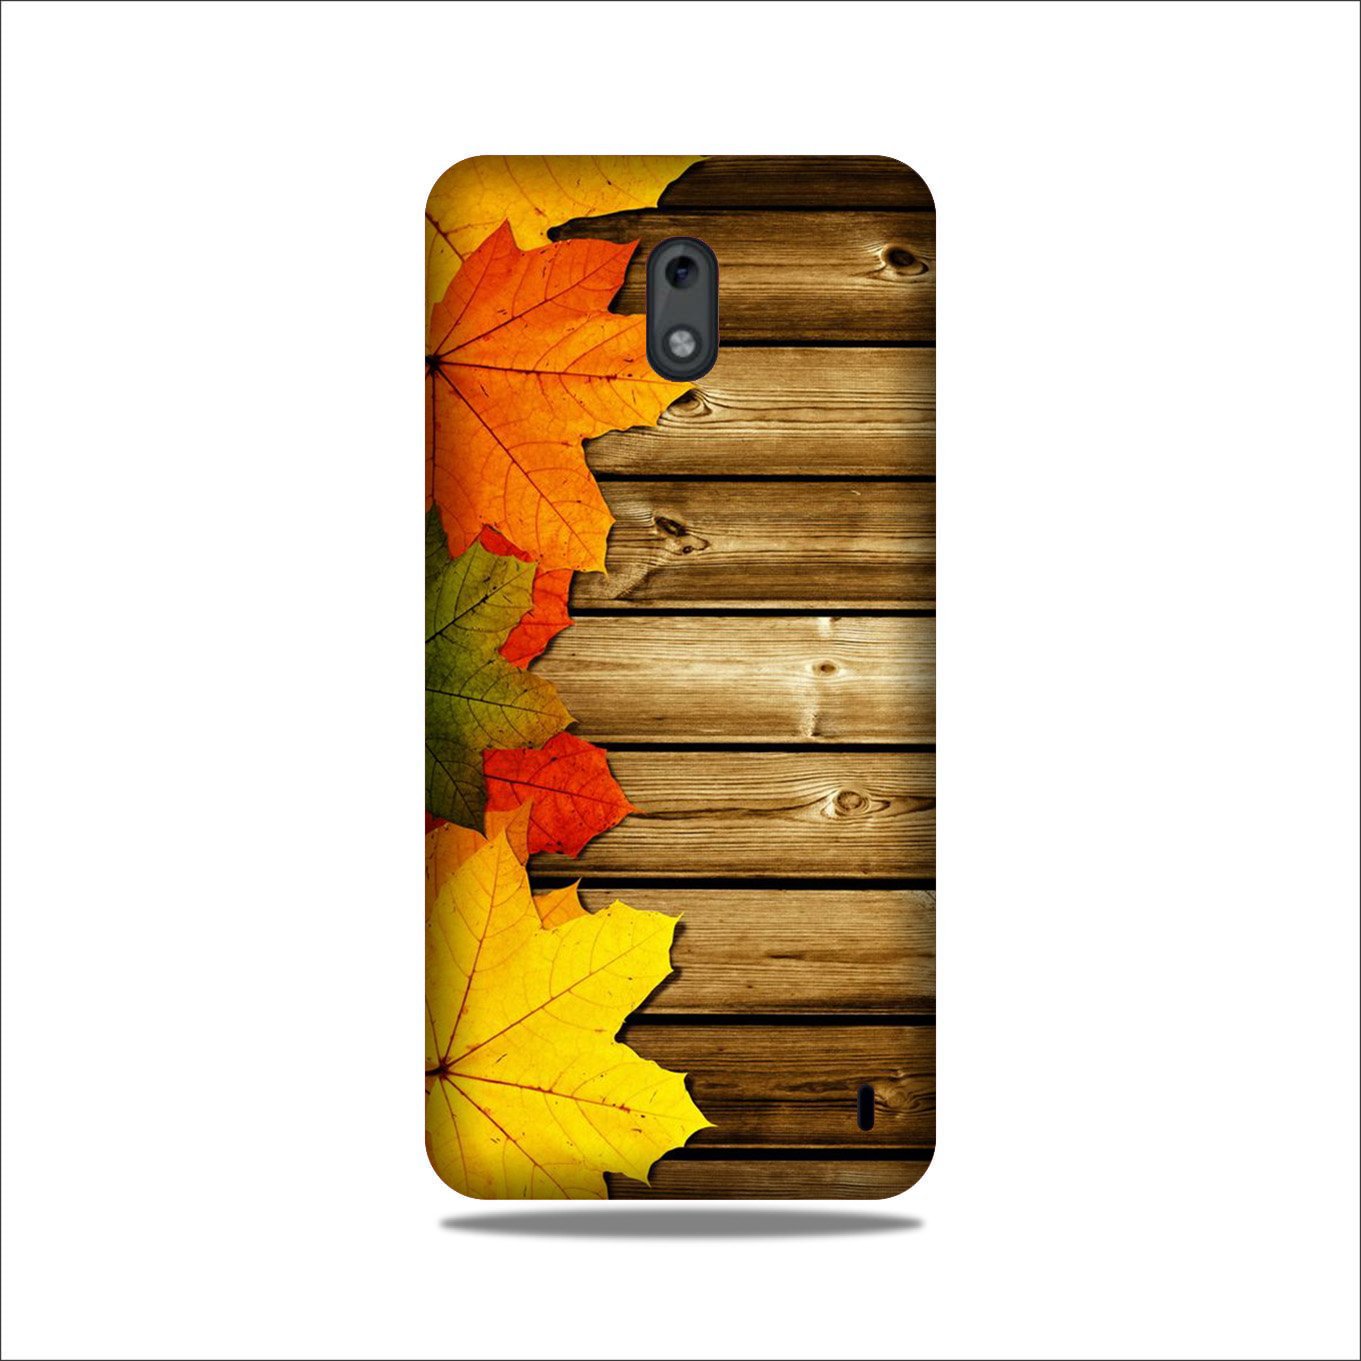 Wooden look3 Case for Nokia 2